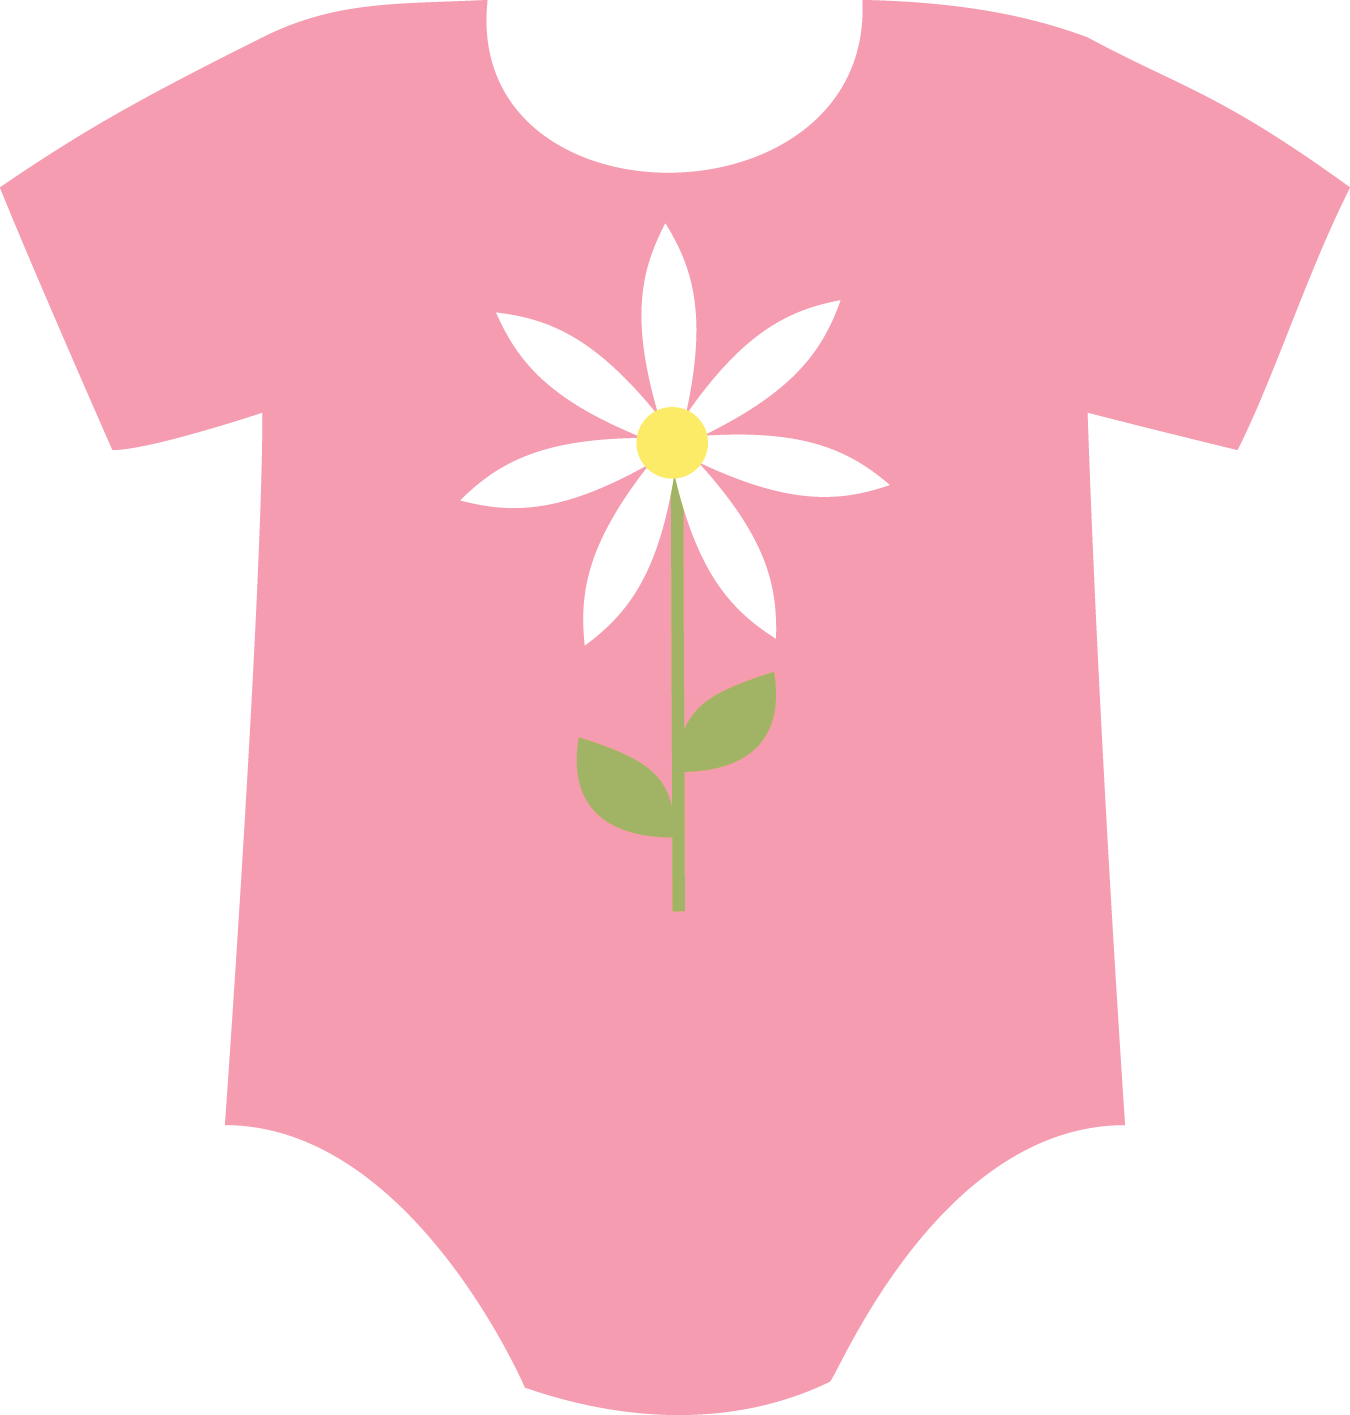 Baby Onesies Clipart. - Oh My Baby!